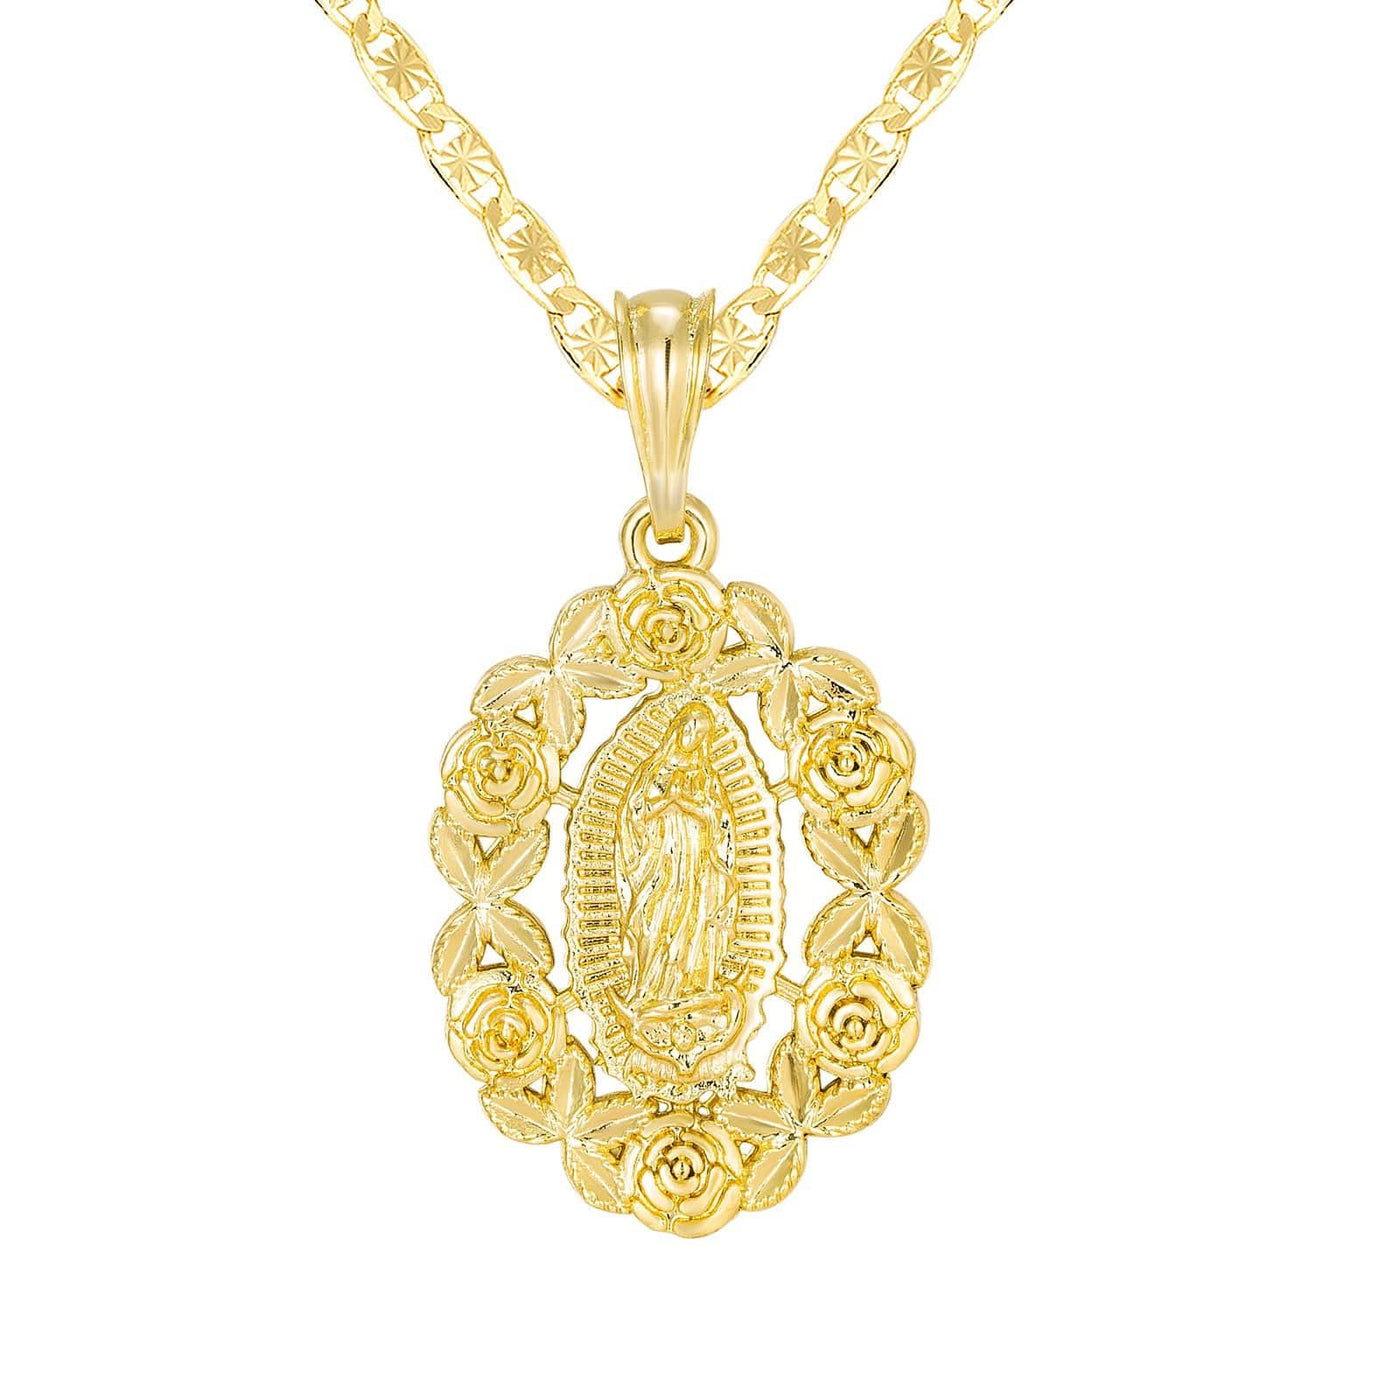 Our Lady of Guadalupe Roses Necklace 14K Gold Plated - Luxe & Co. Jewelry